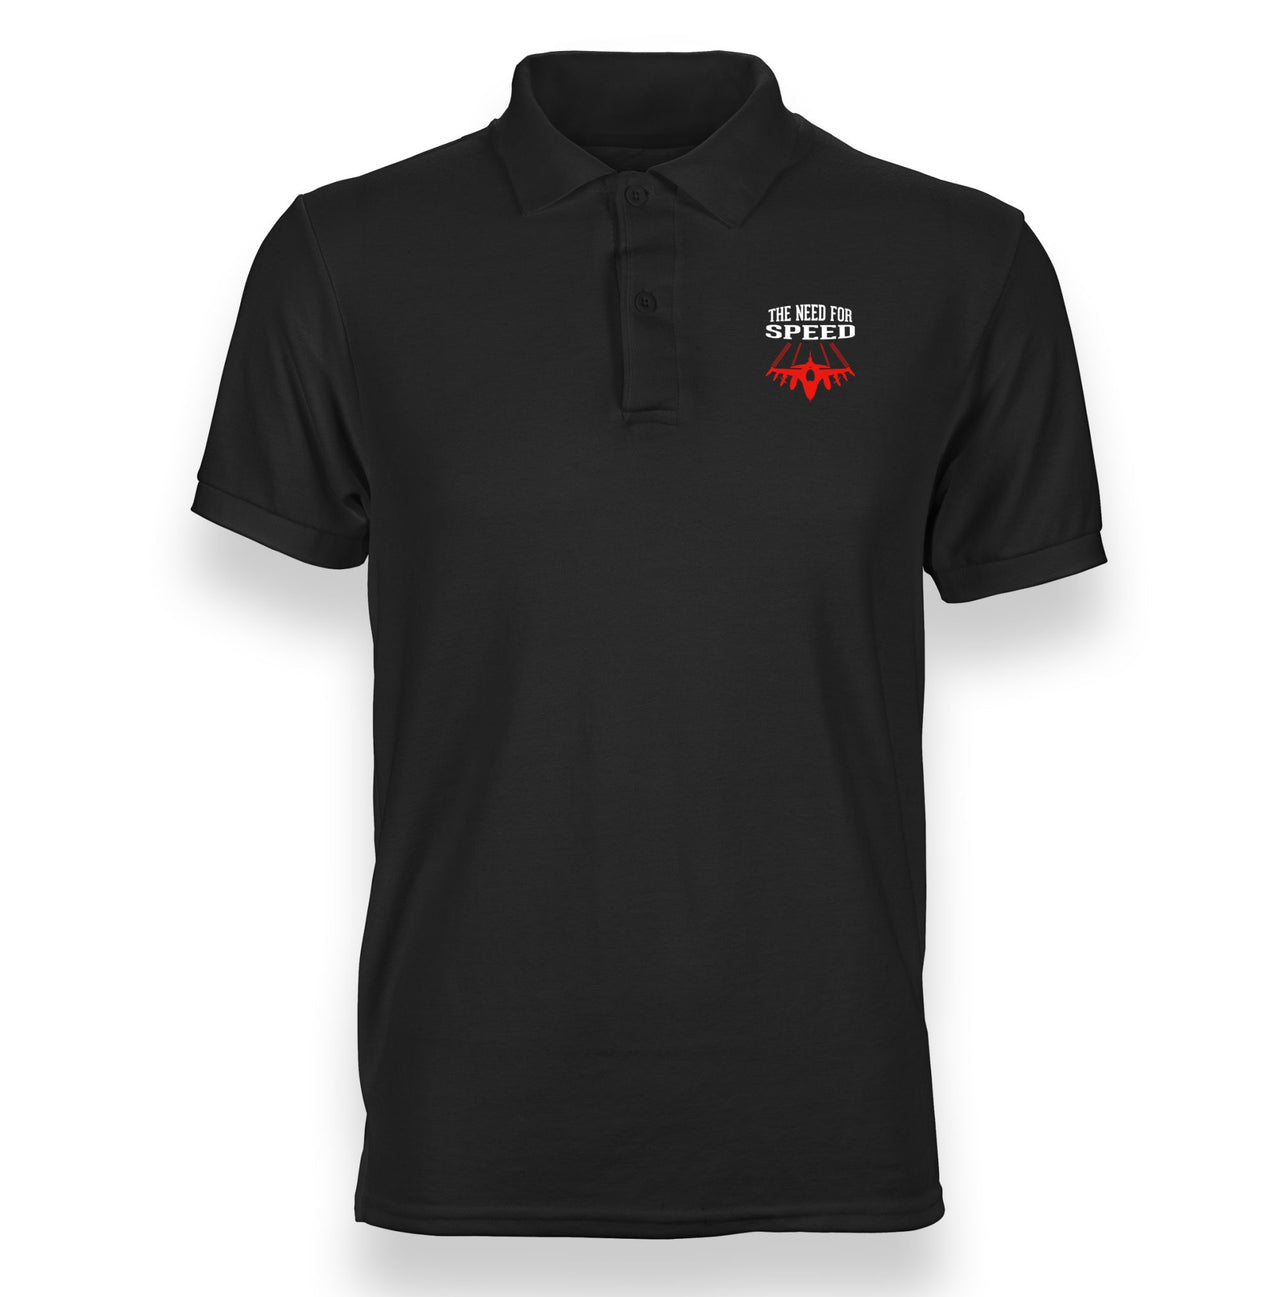 The Need For Speed Designed "WOMEN" Polo T-Shirts